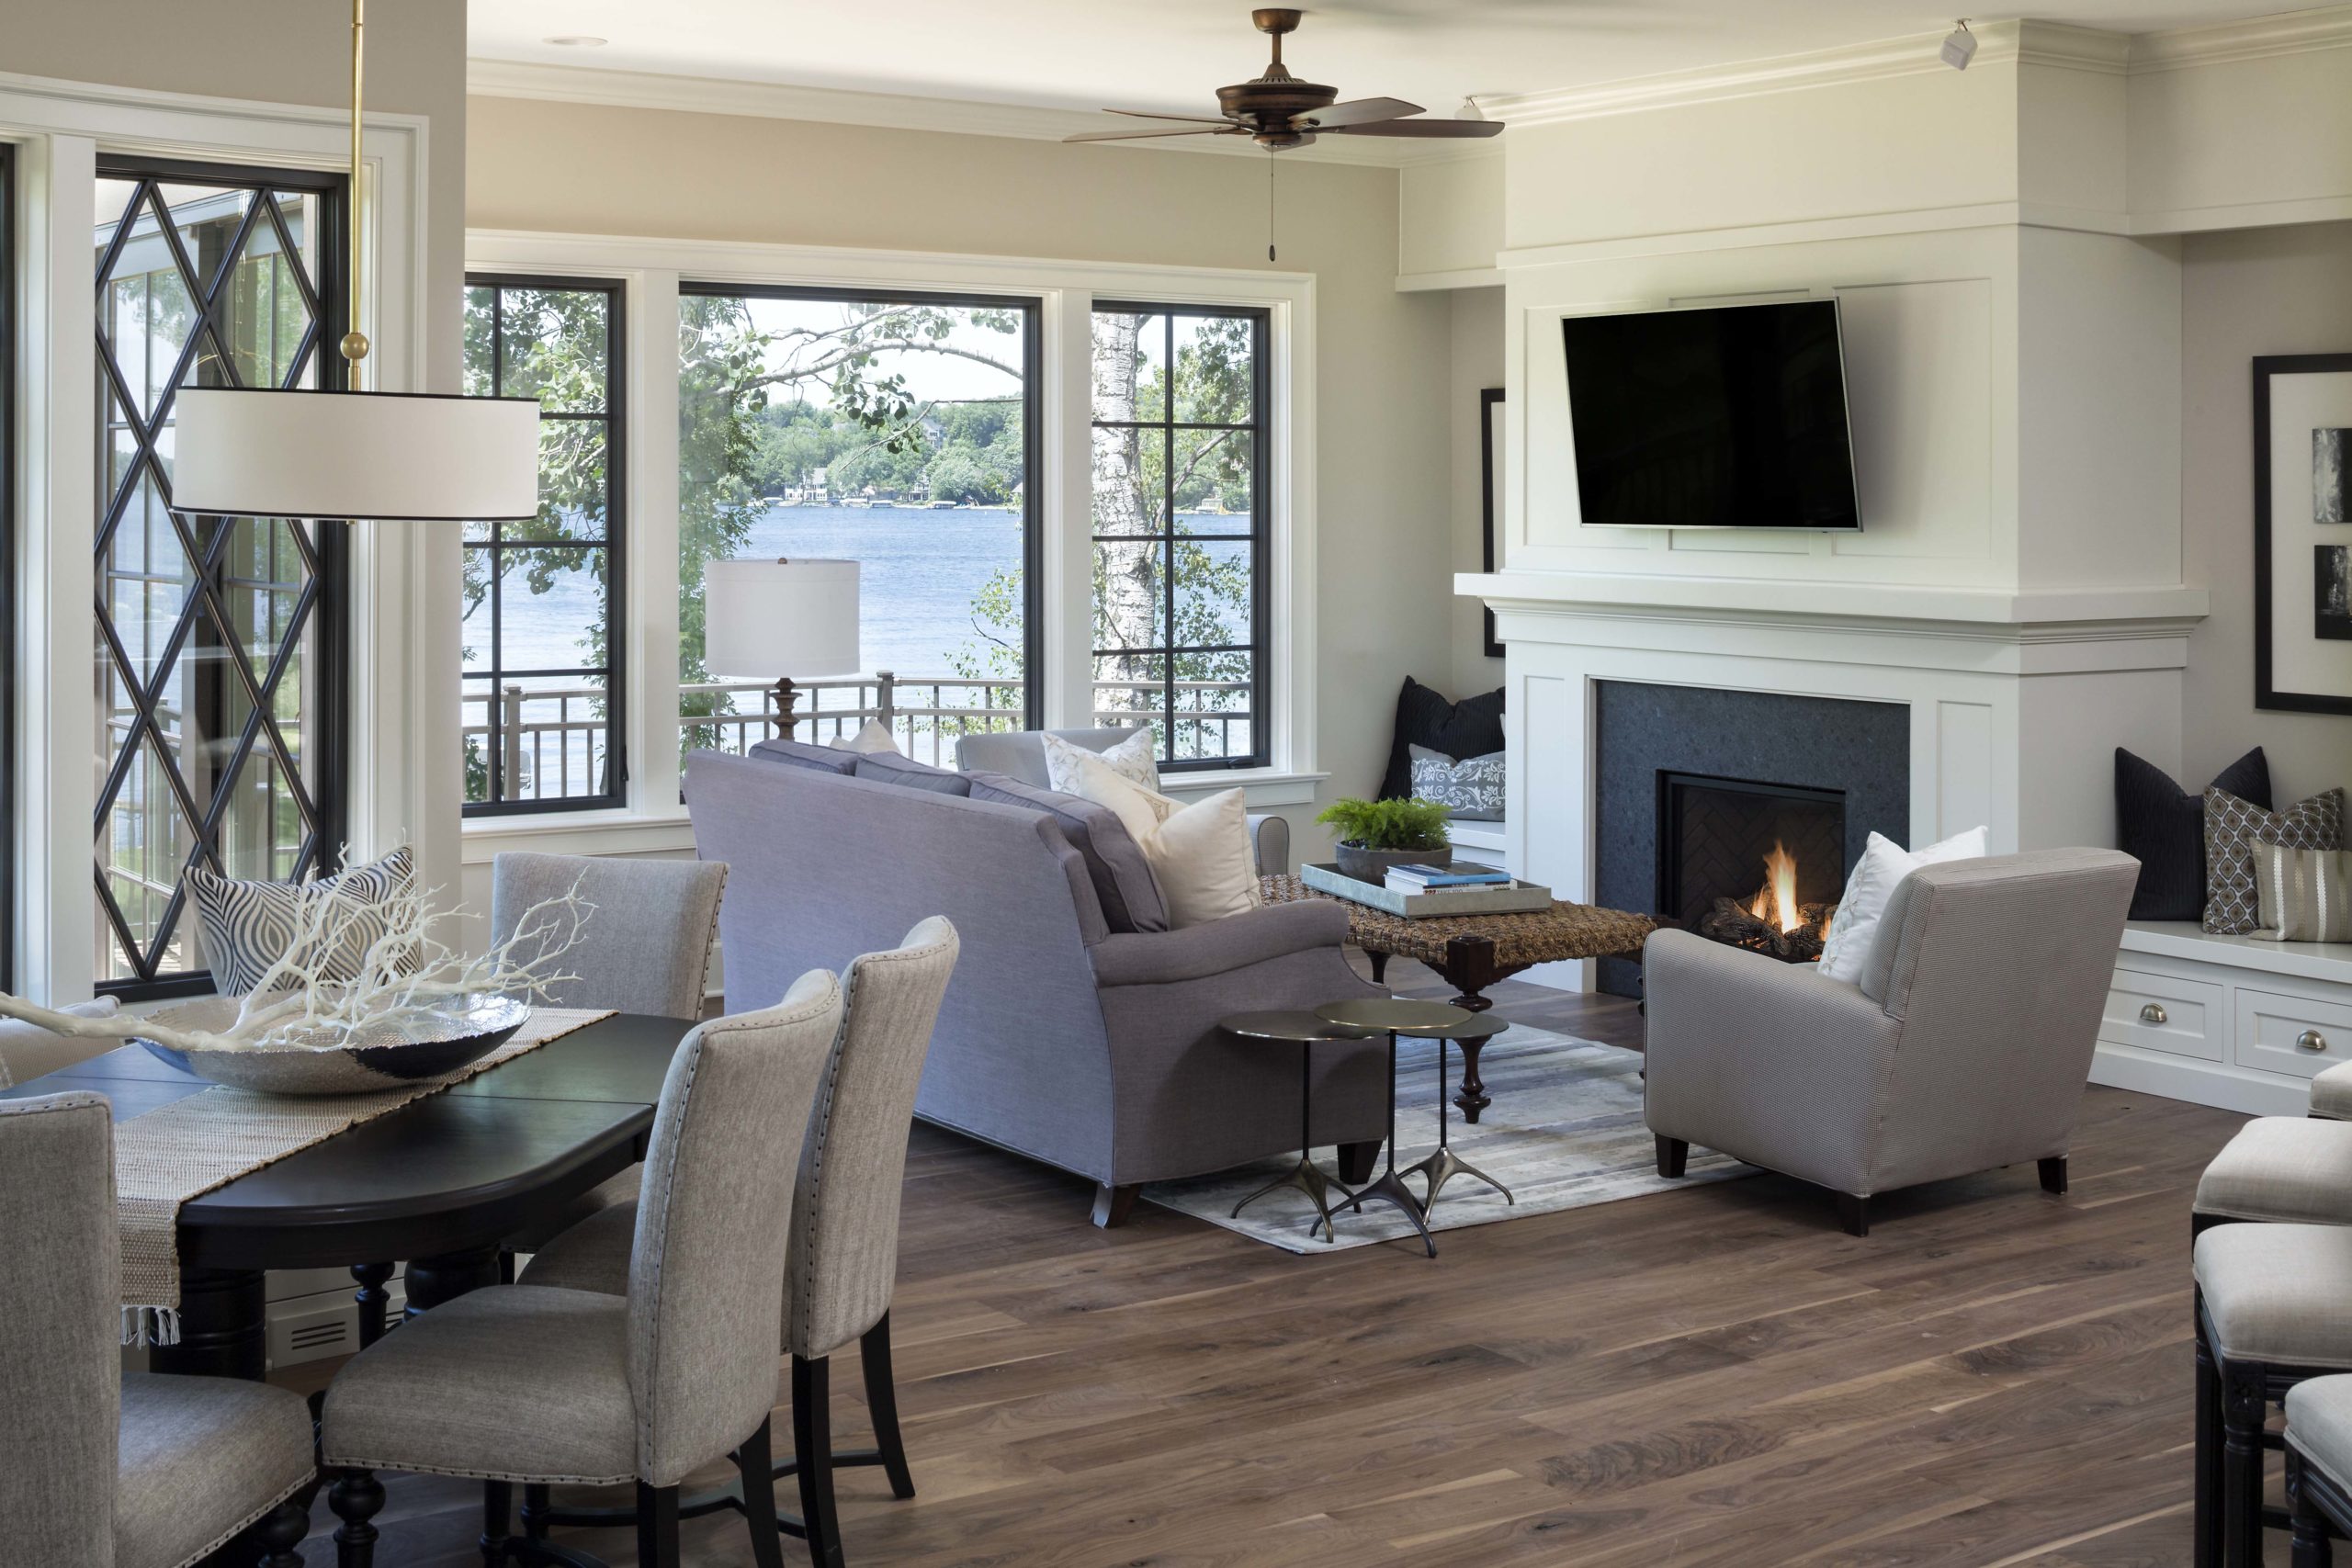 A living room with hardwood floors and a fireplace.